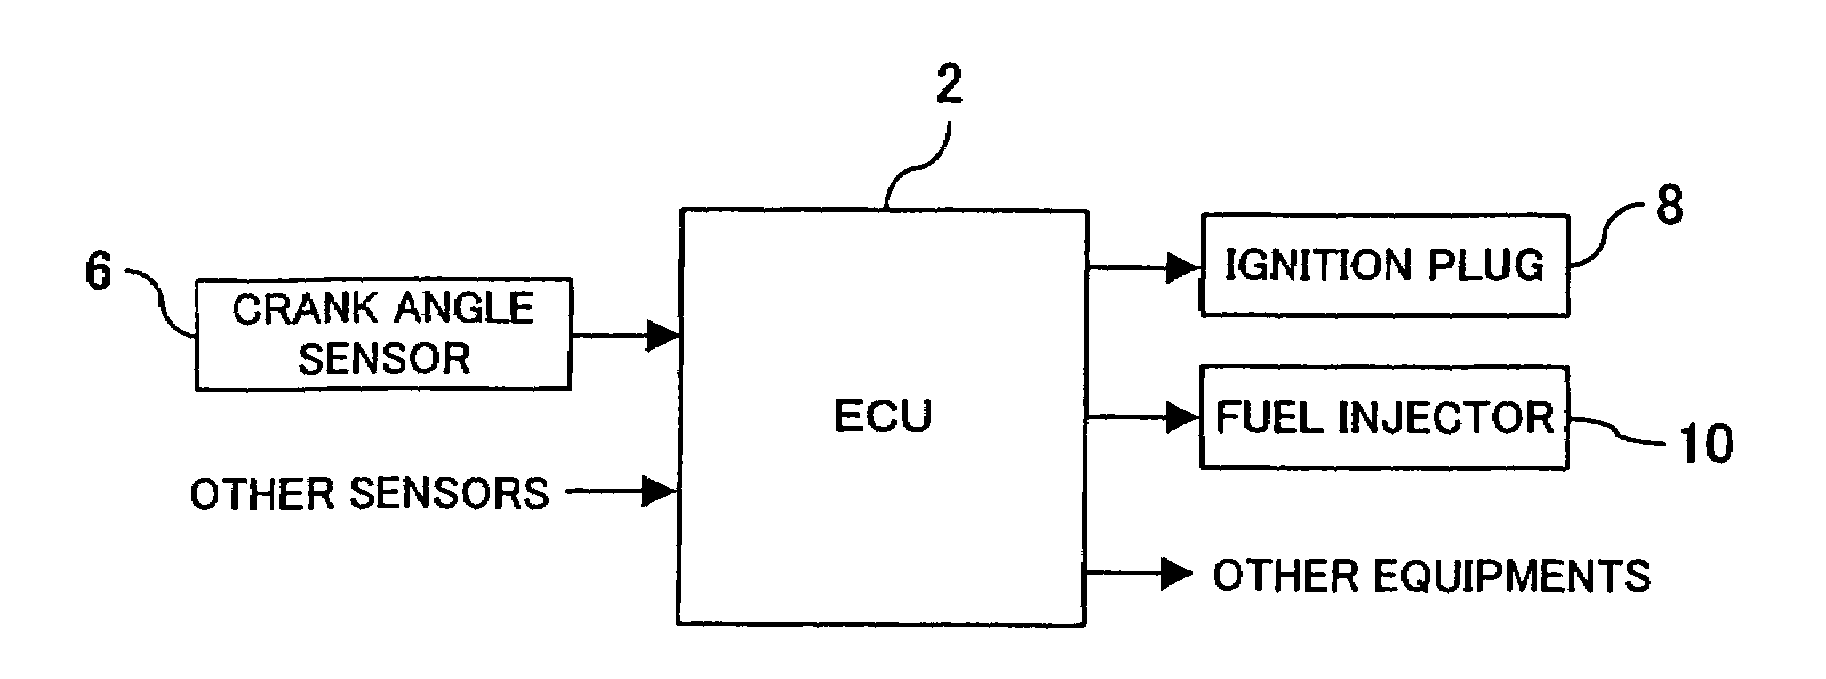 Internal combustion engine controller